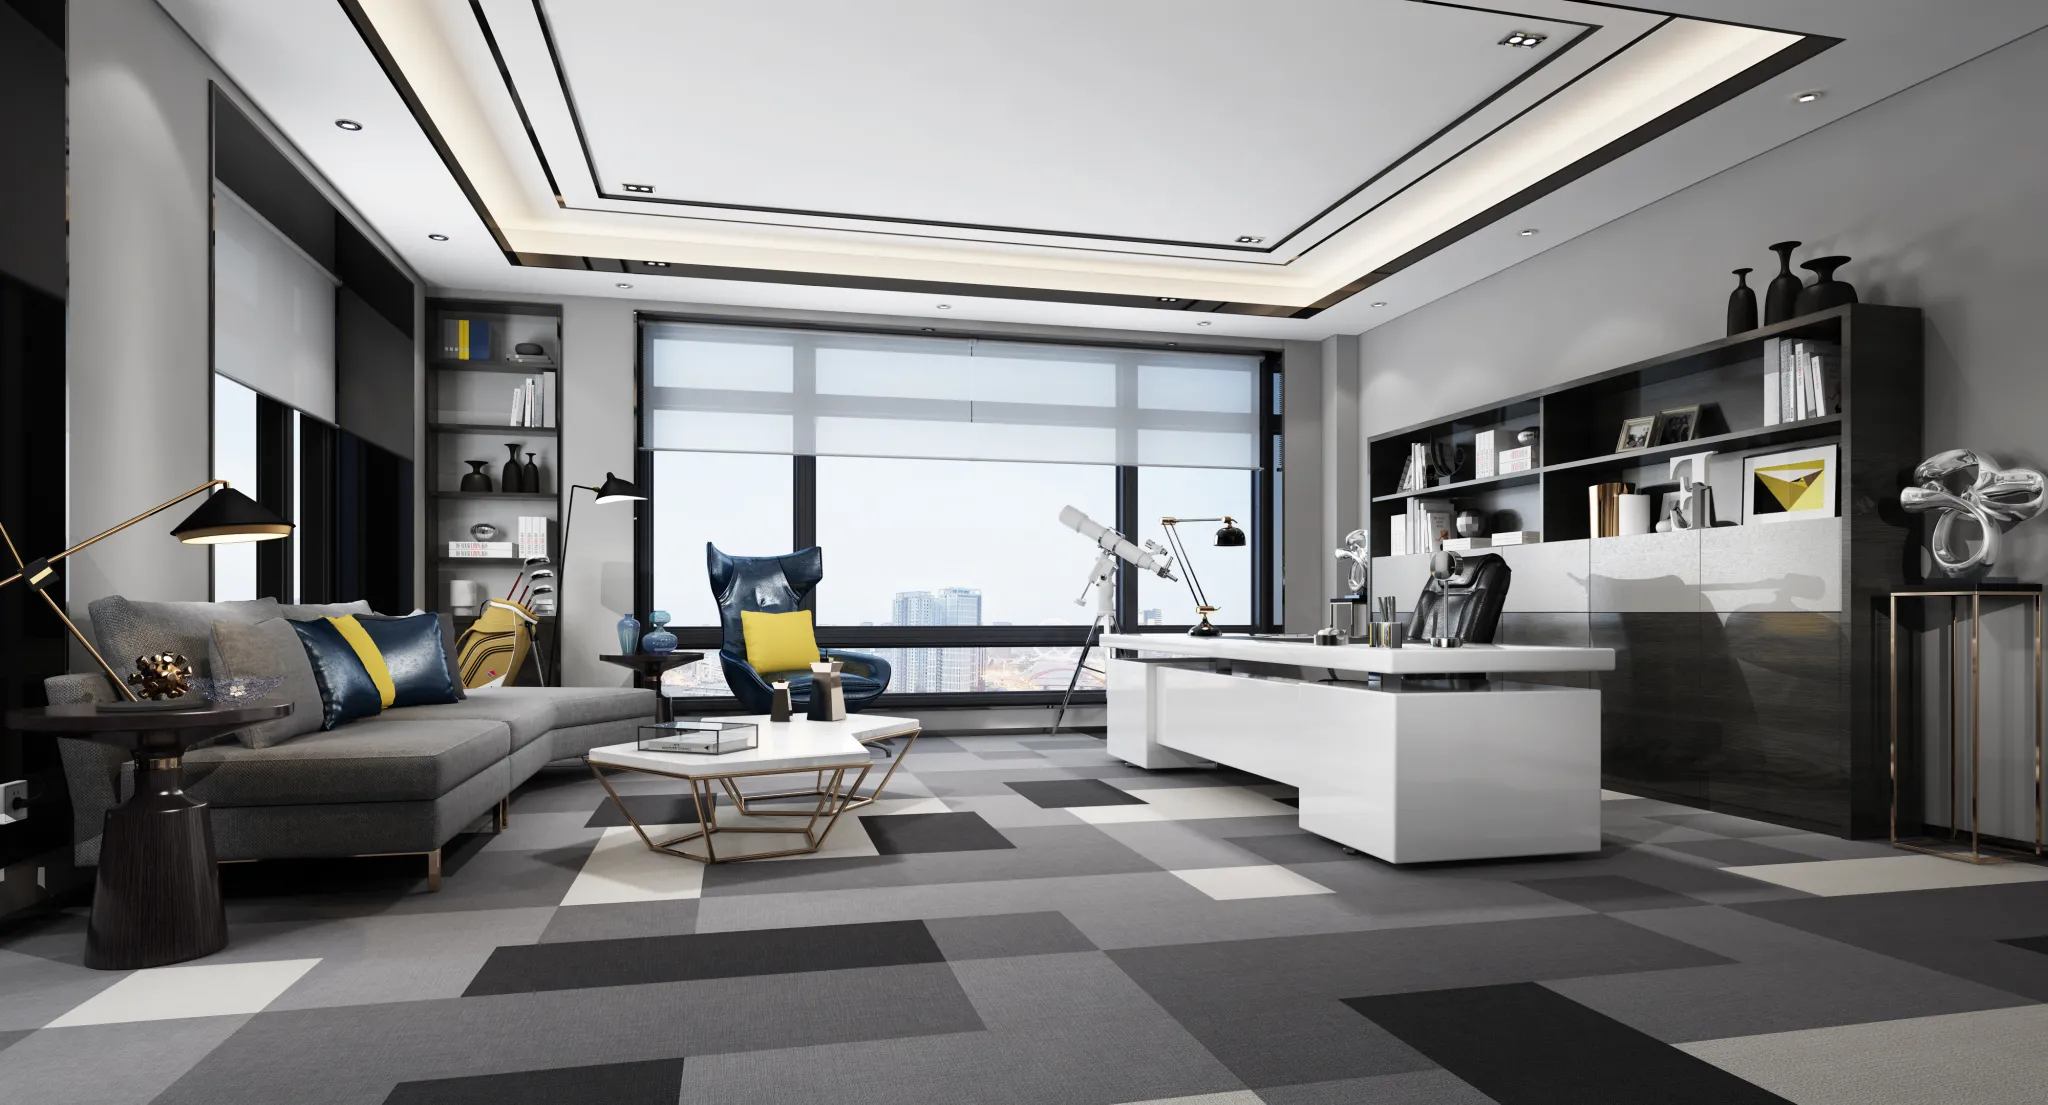 TZ INTERIOR DESIGN 2021 (VRAY) – 21. MANAGER OFFICE – 12